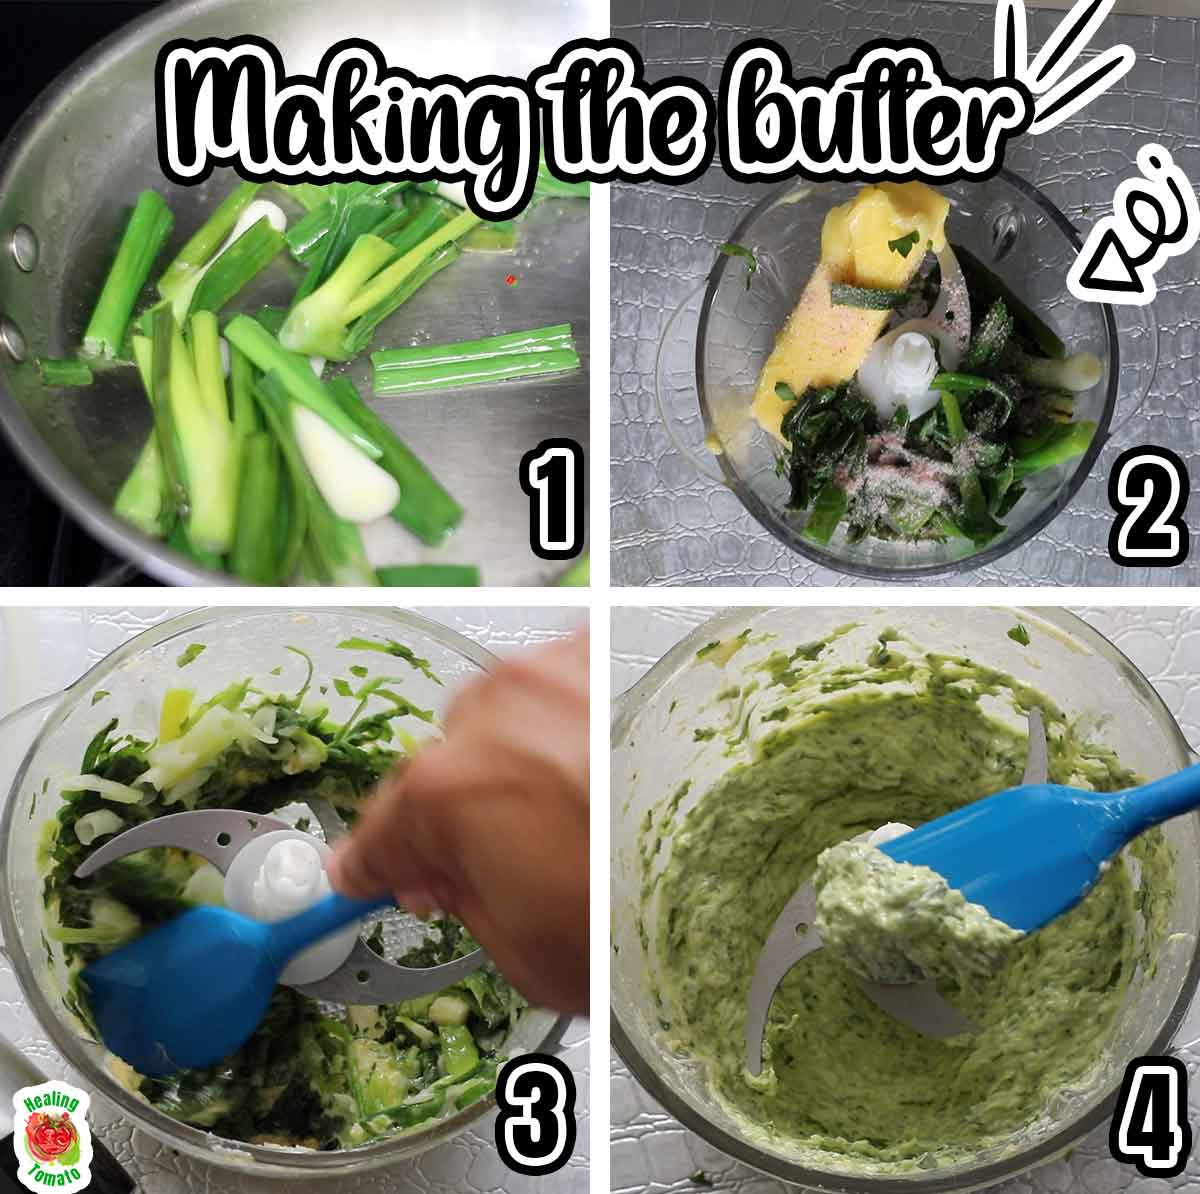 Collage of 4 ingredients needed to make scallion butter